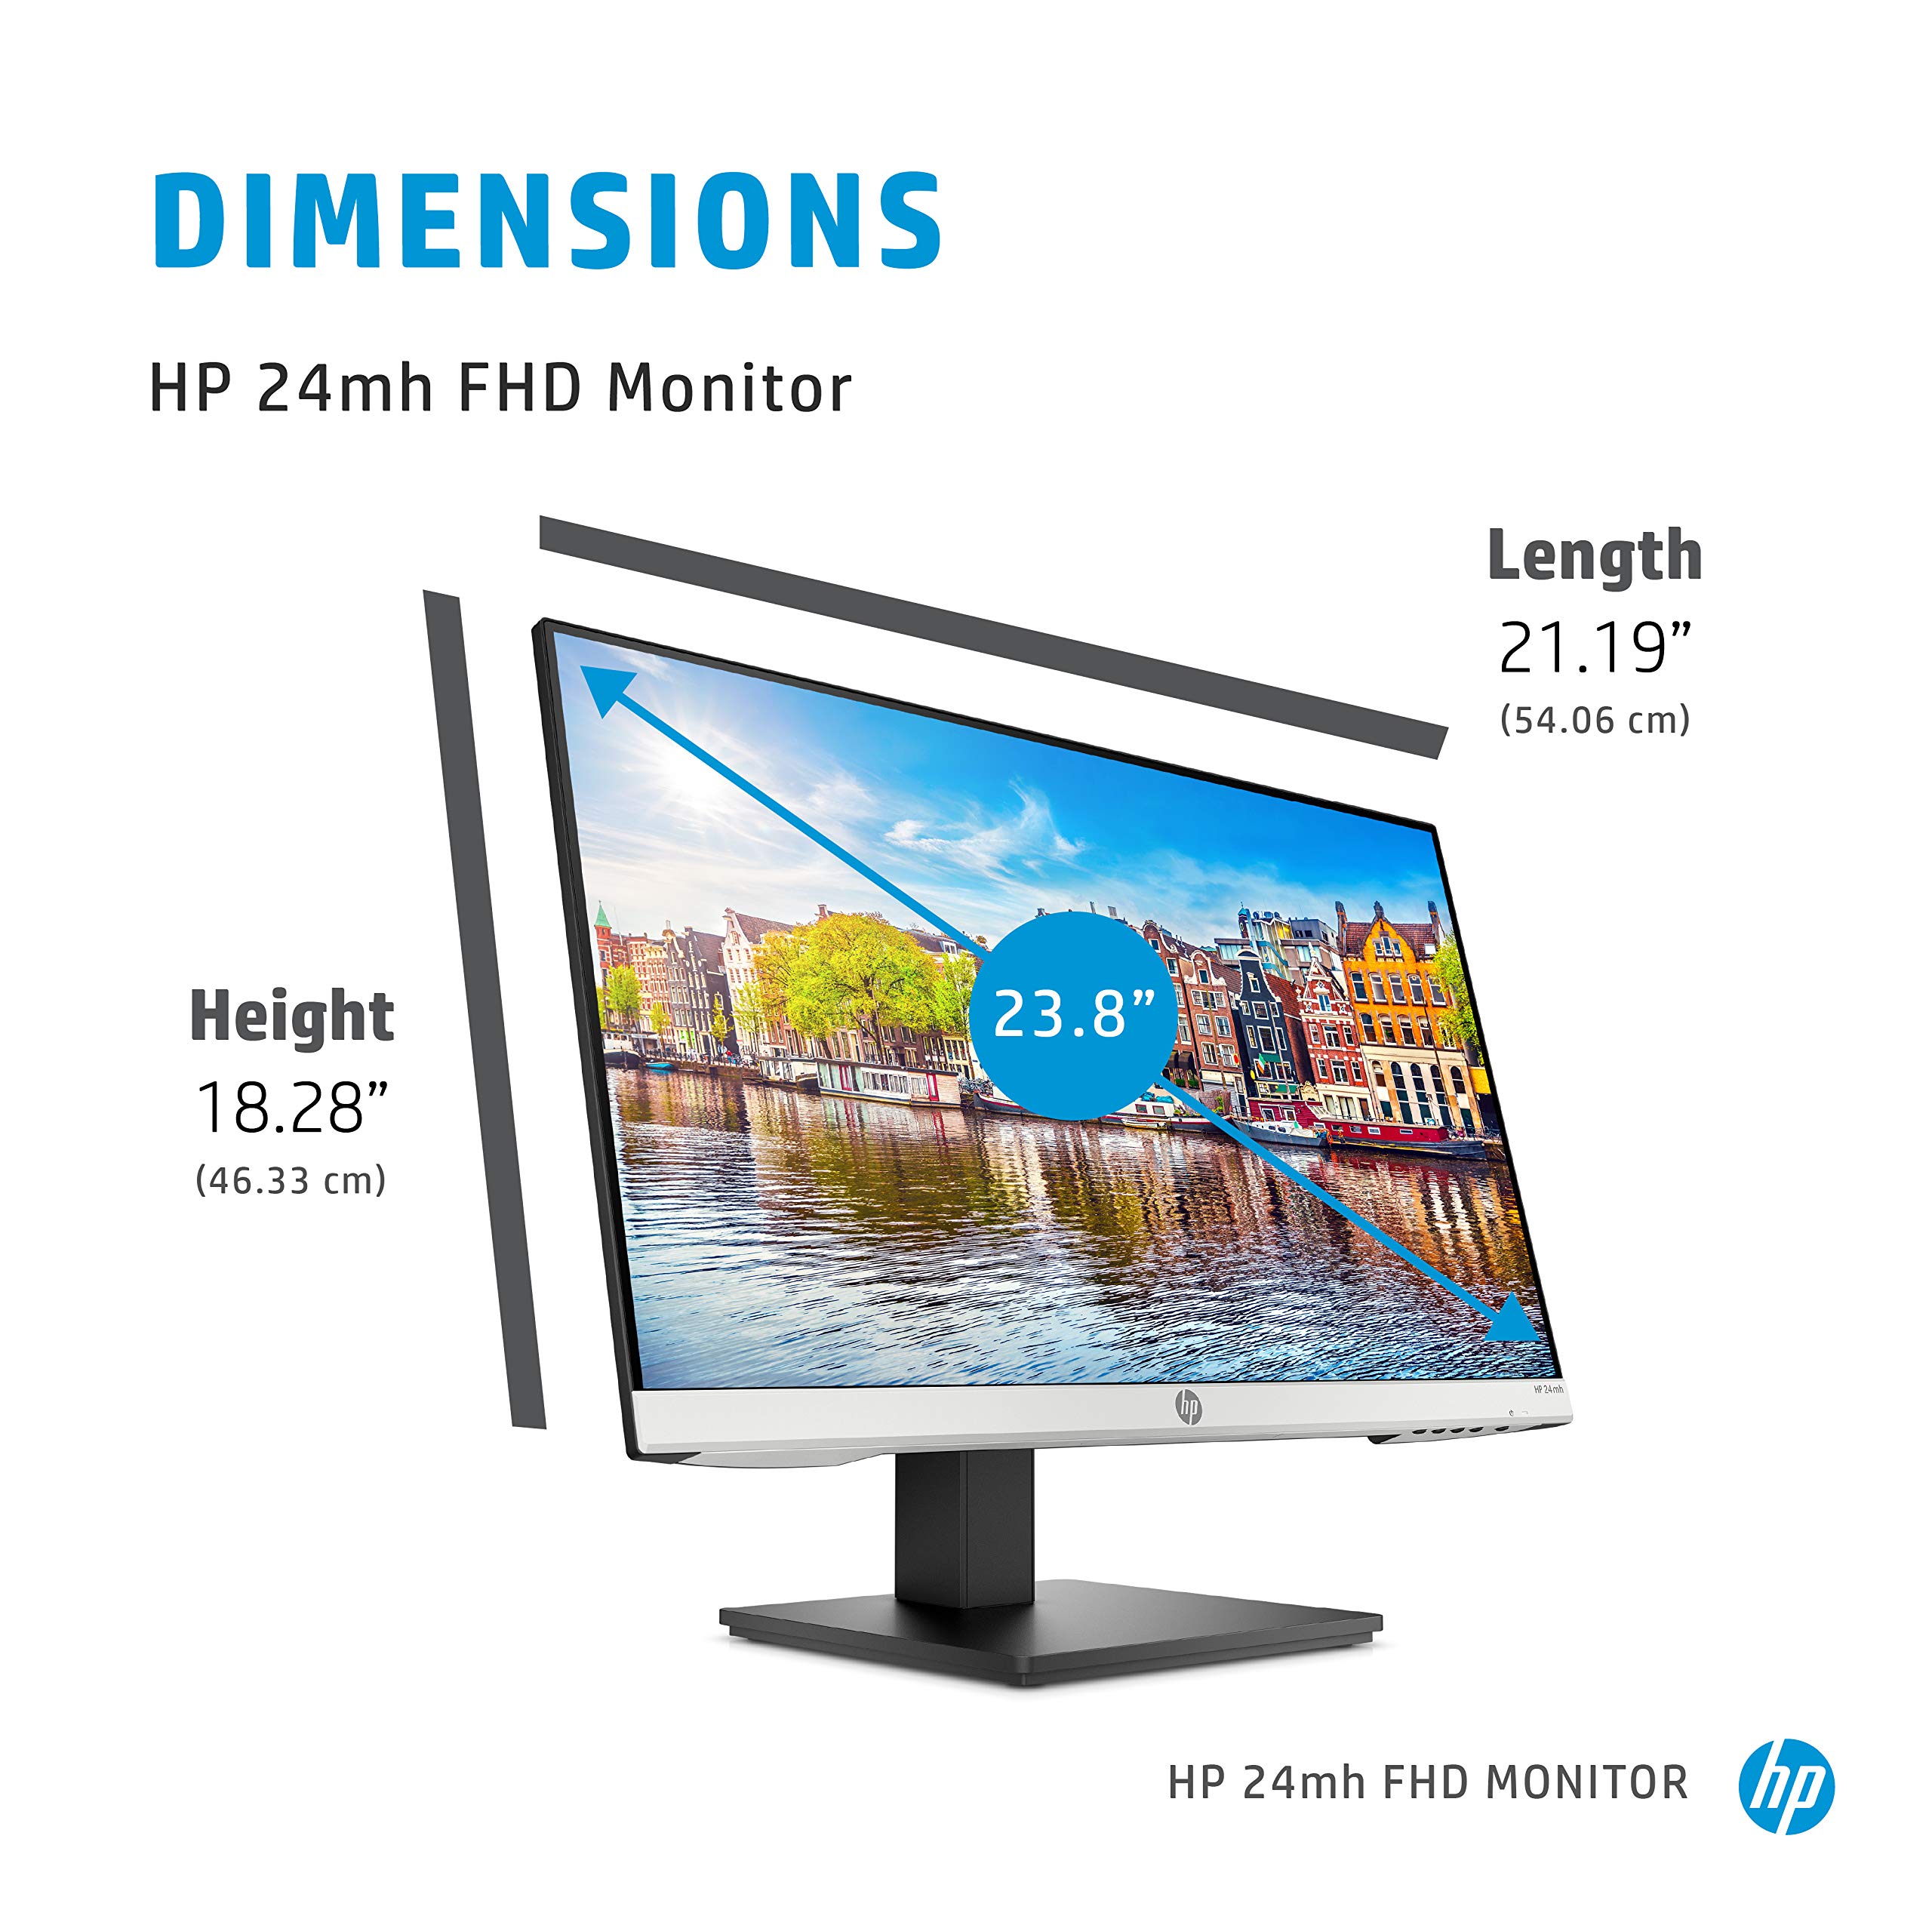 HP 24mh FHD Monitor - Computer Monitor with 23.8-Inch IPS Display (1080p) - Built-In Speakers and VESA Mounting - Height/Tilt Adjustment for Ergonomic Viewing - HDMI and DisplayPort - (1D0J9AA#ABA)